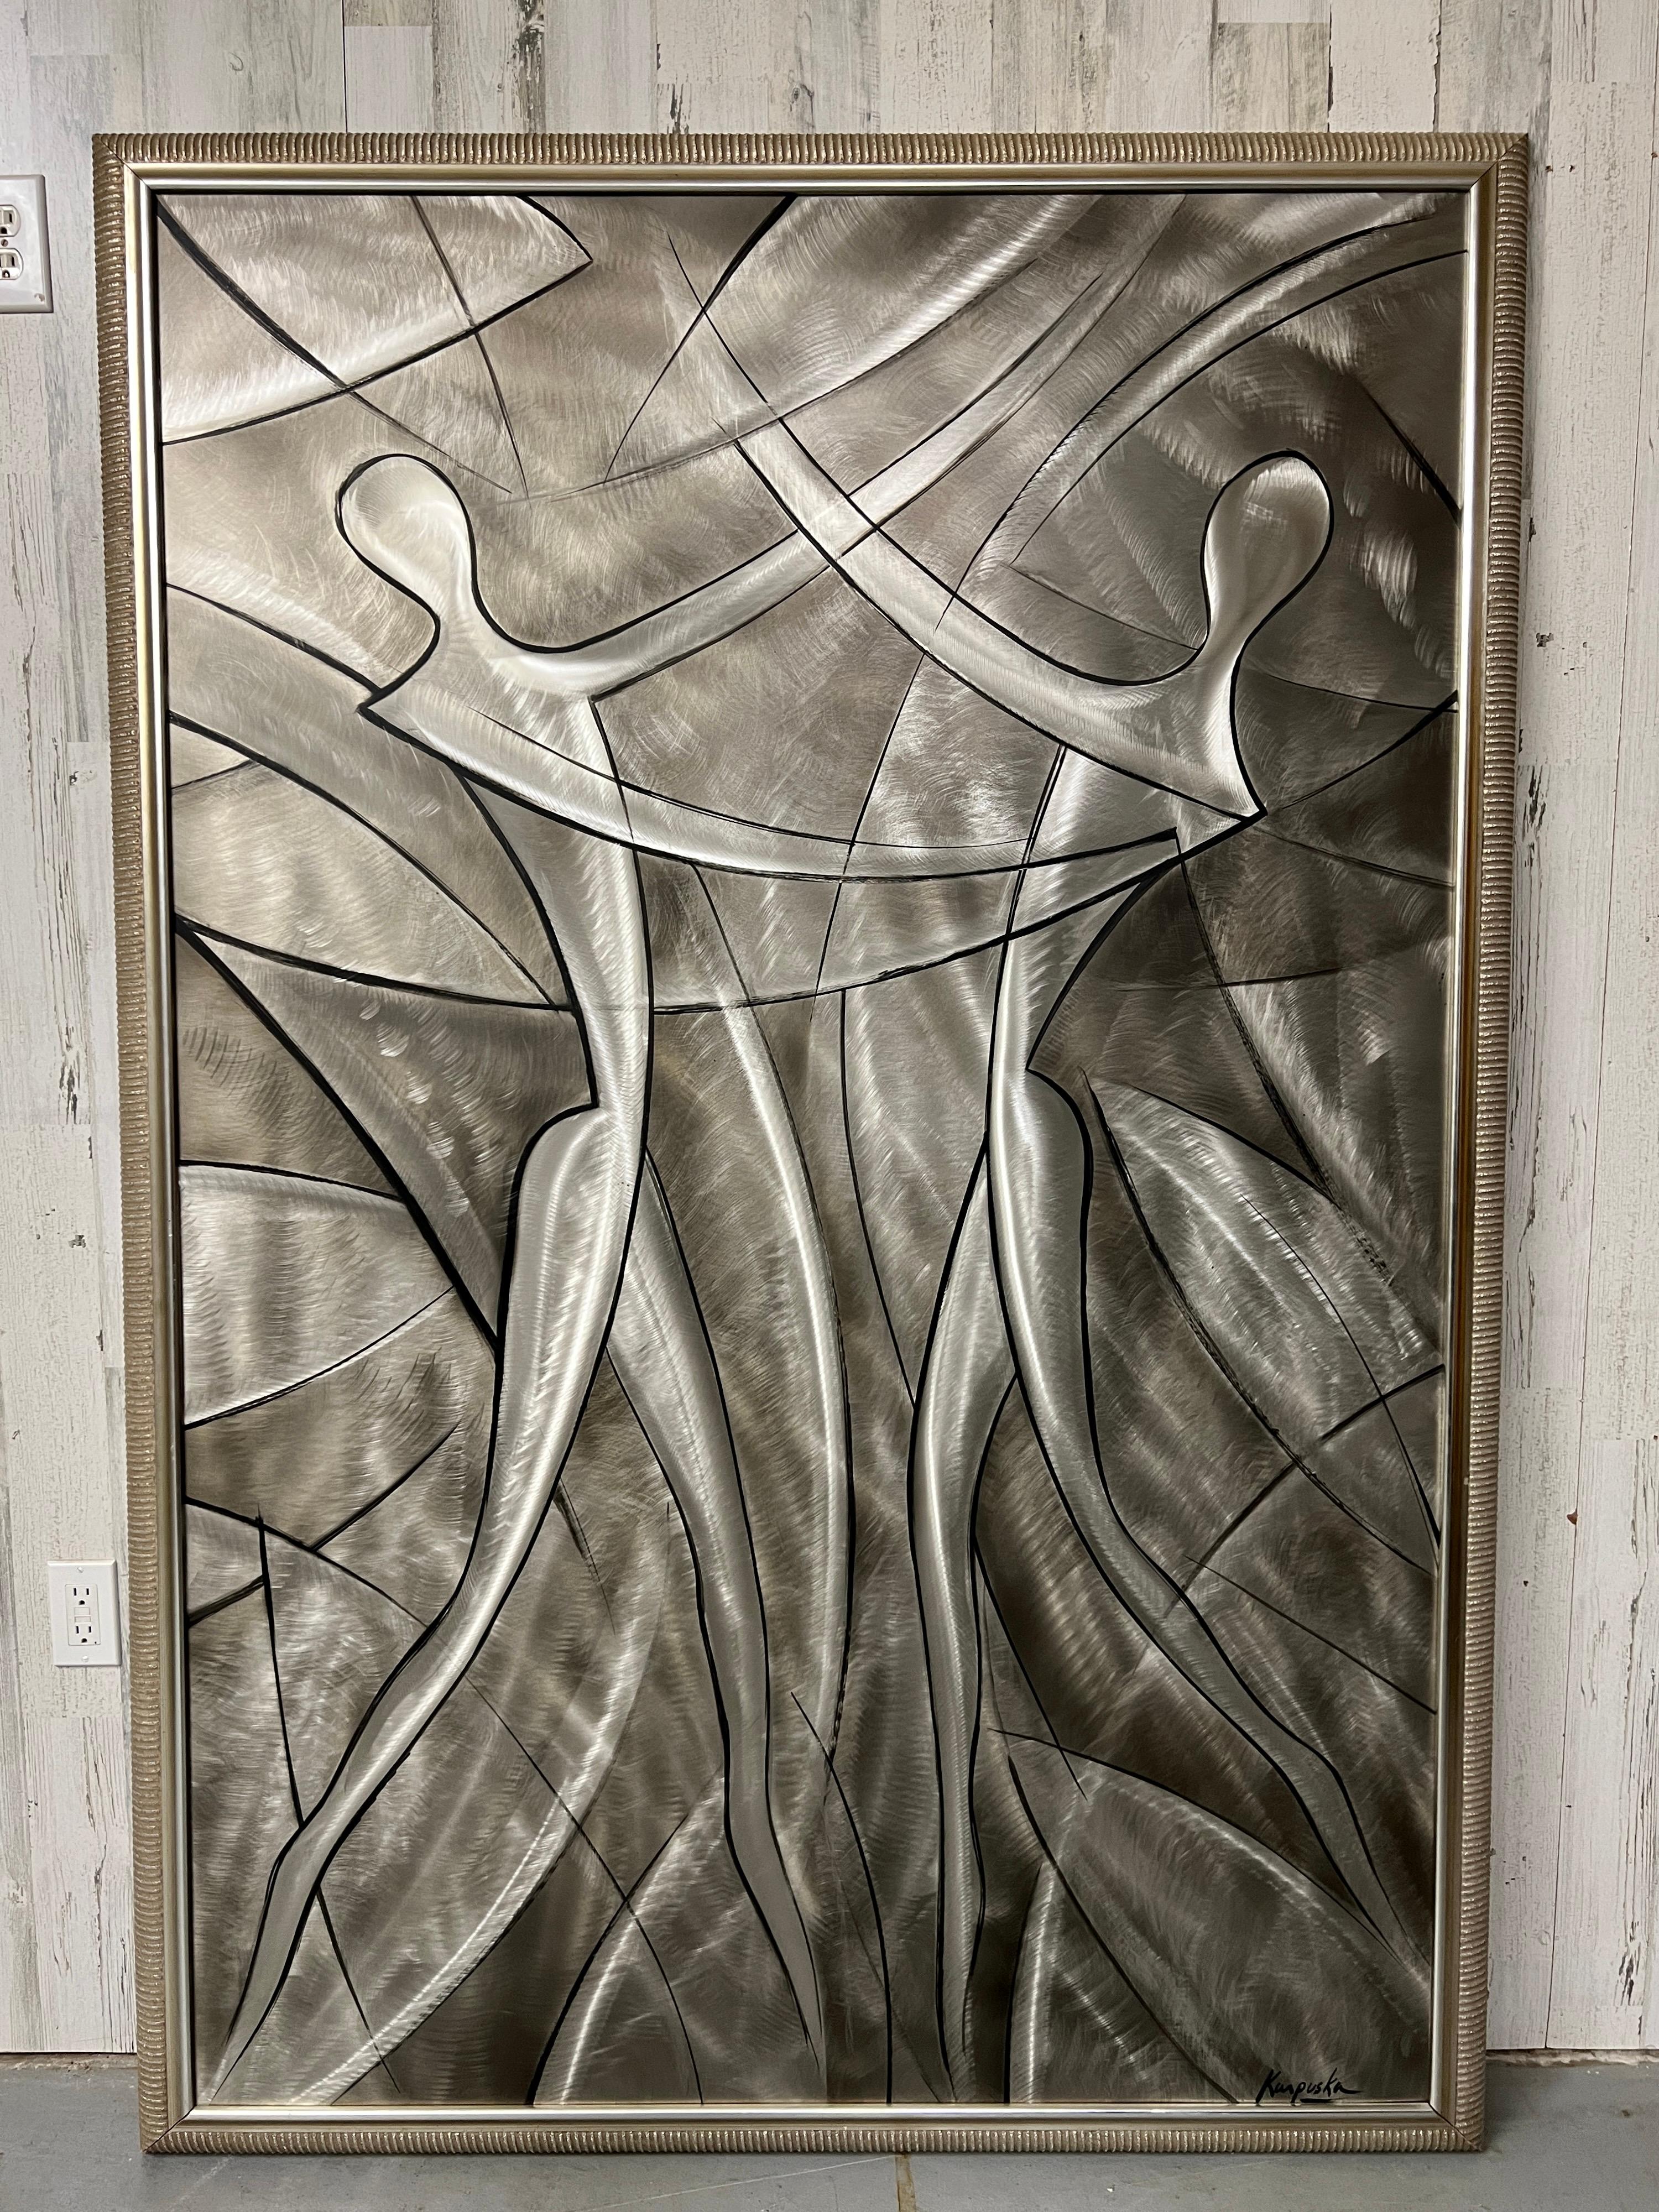 Etched stainless steel with paint accents wall art titled 